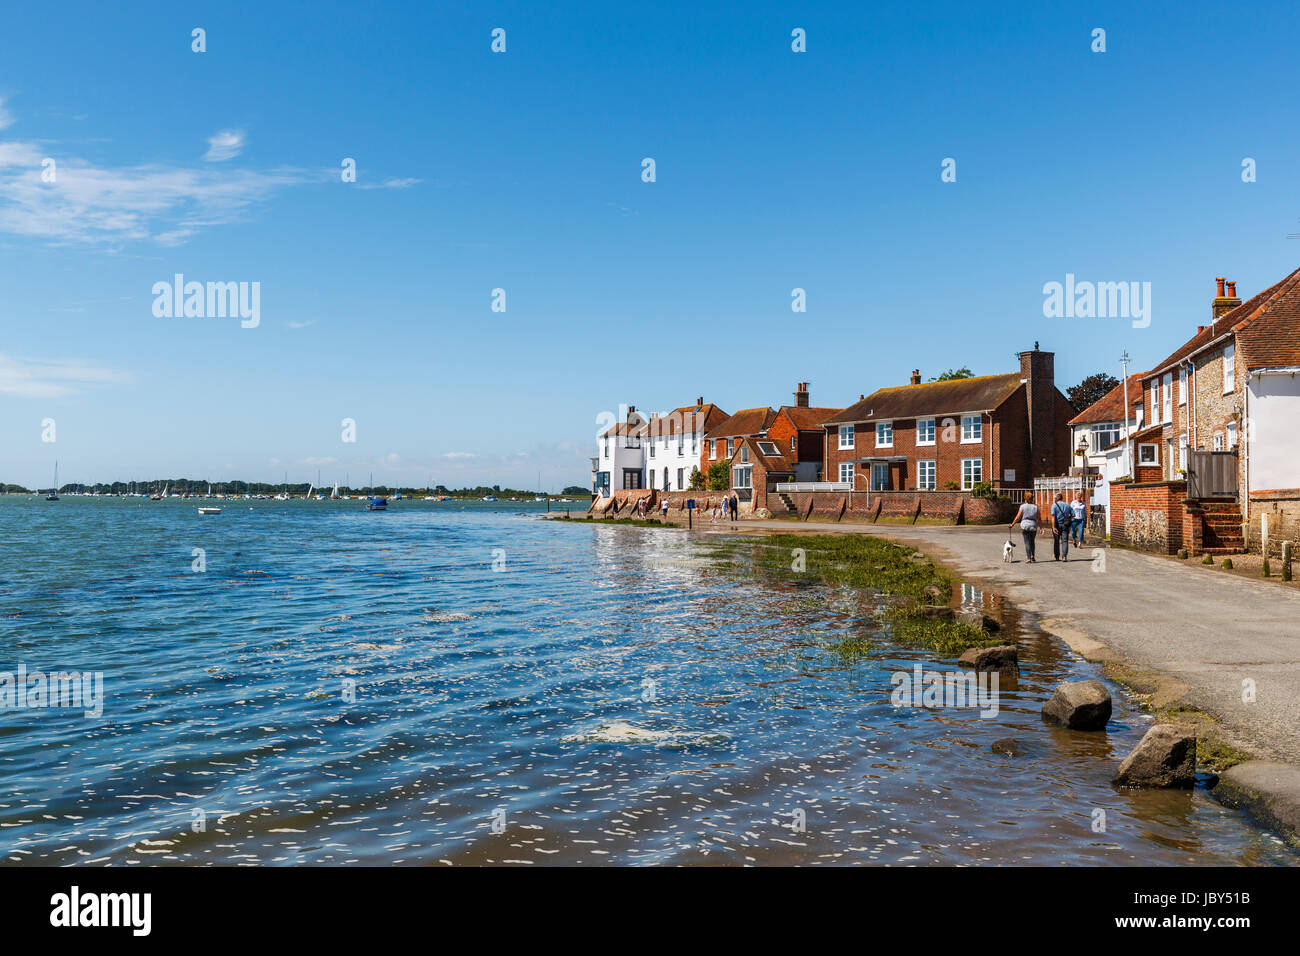 Rising tide flooding the seafront access road, Bosham, a south coast coastal village in Chichester Harbour, West Sussex, southern England, UK Stock Photo